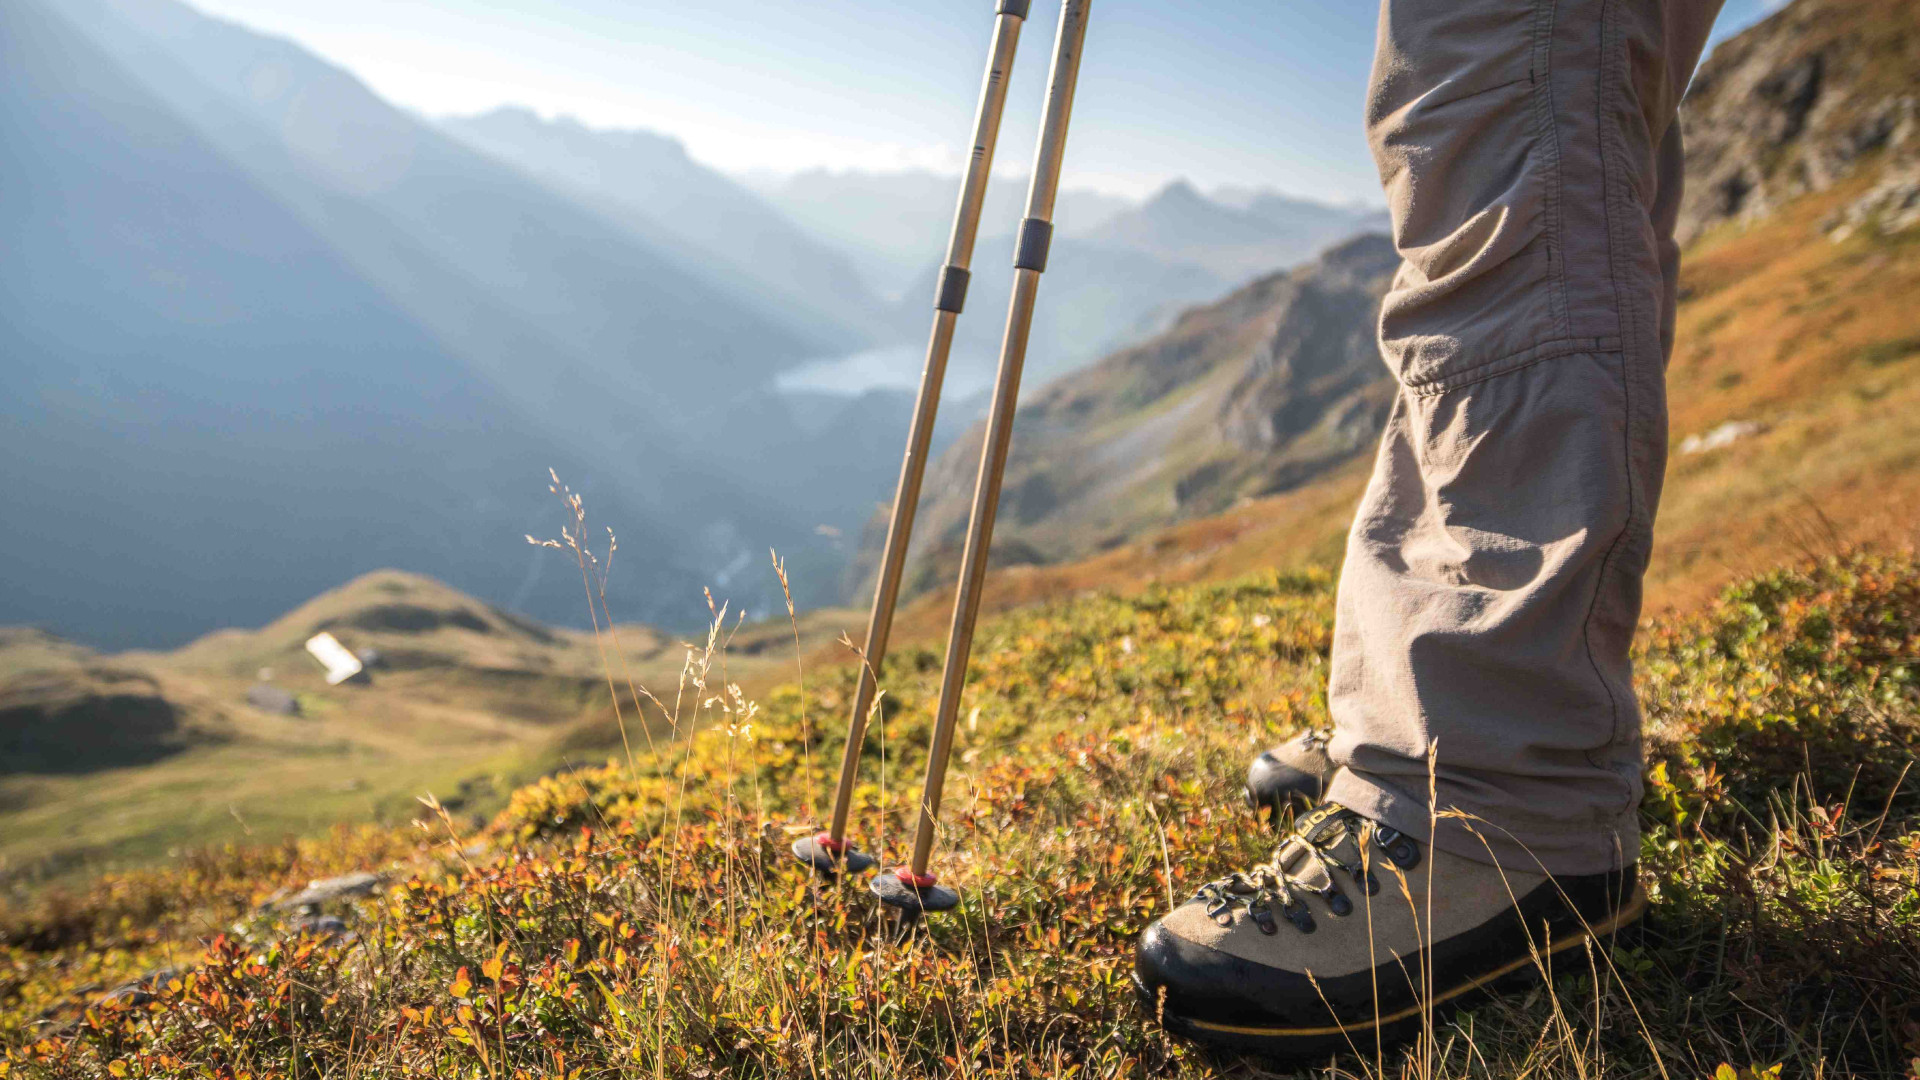 Hiking shoes vs trail running shoes: which is best for you?